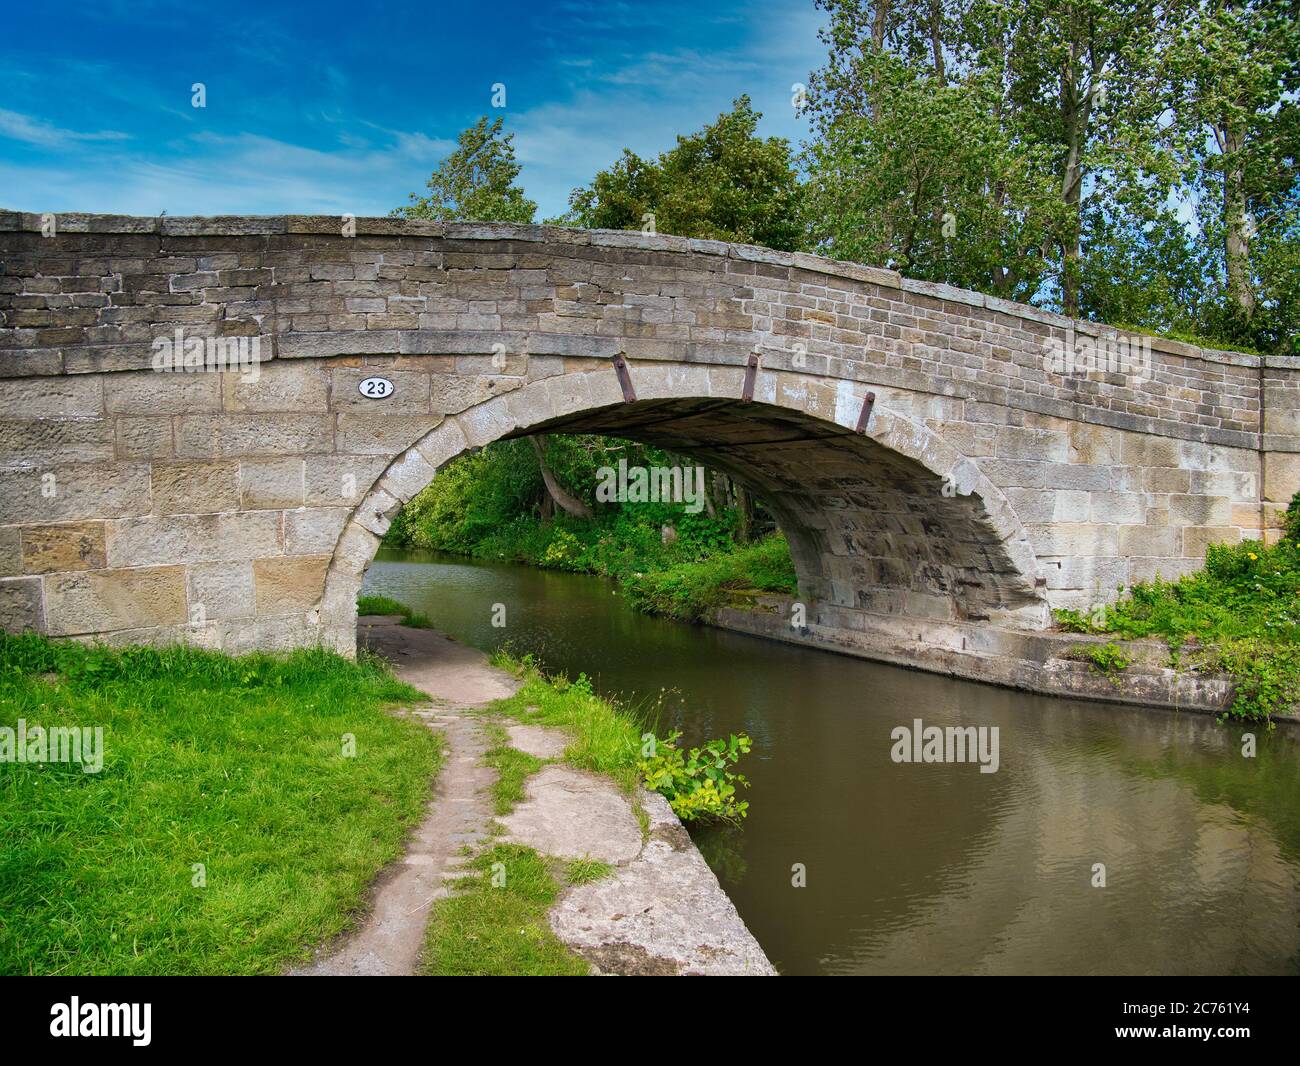 Sandstone Bridge 23 on a quiet, rural section of the Leeds to Liverpool Canal in Lancashire, UK. Taken on a sunny day with blue sky Stock Photo